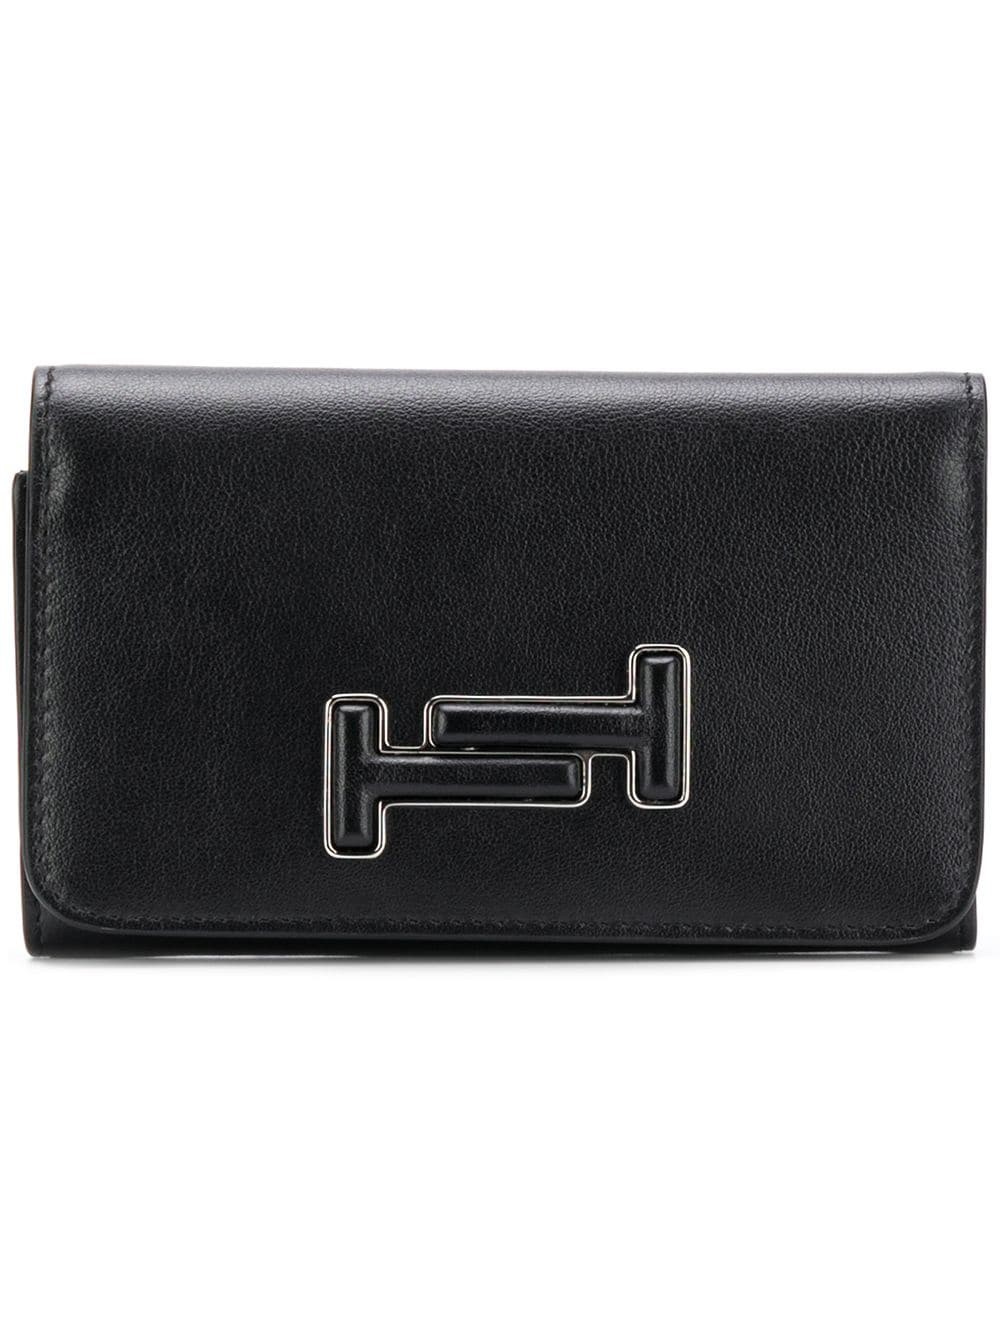 tod`s LOGO CLUTCH BAG available on montiboutique.com - 25109